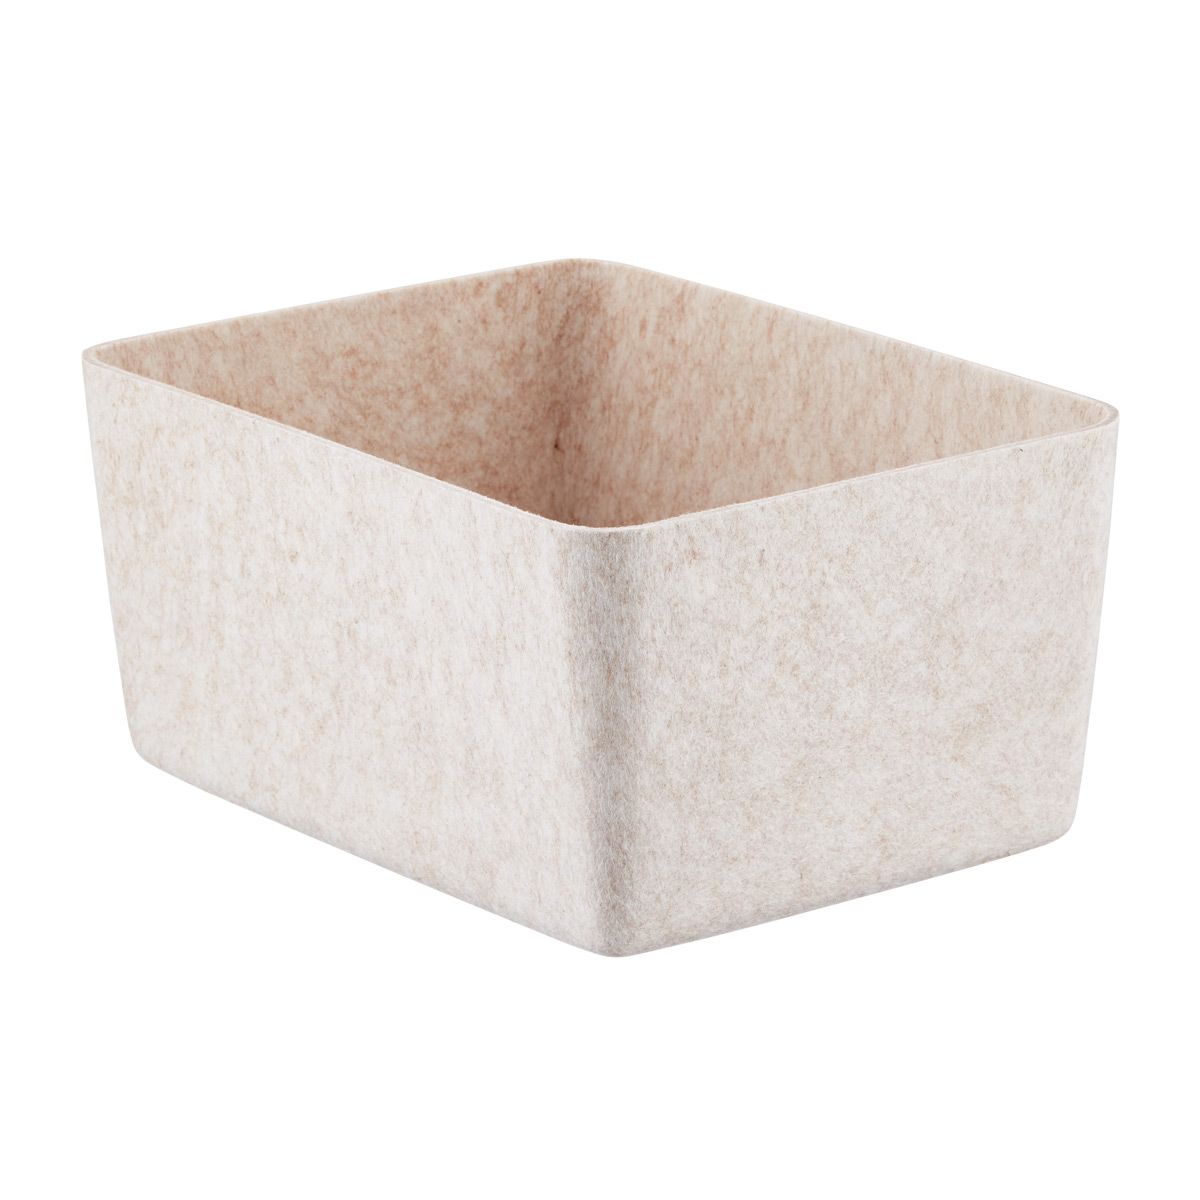 SortJoy Sculpted Wide Bin Stone | The Container Store